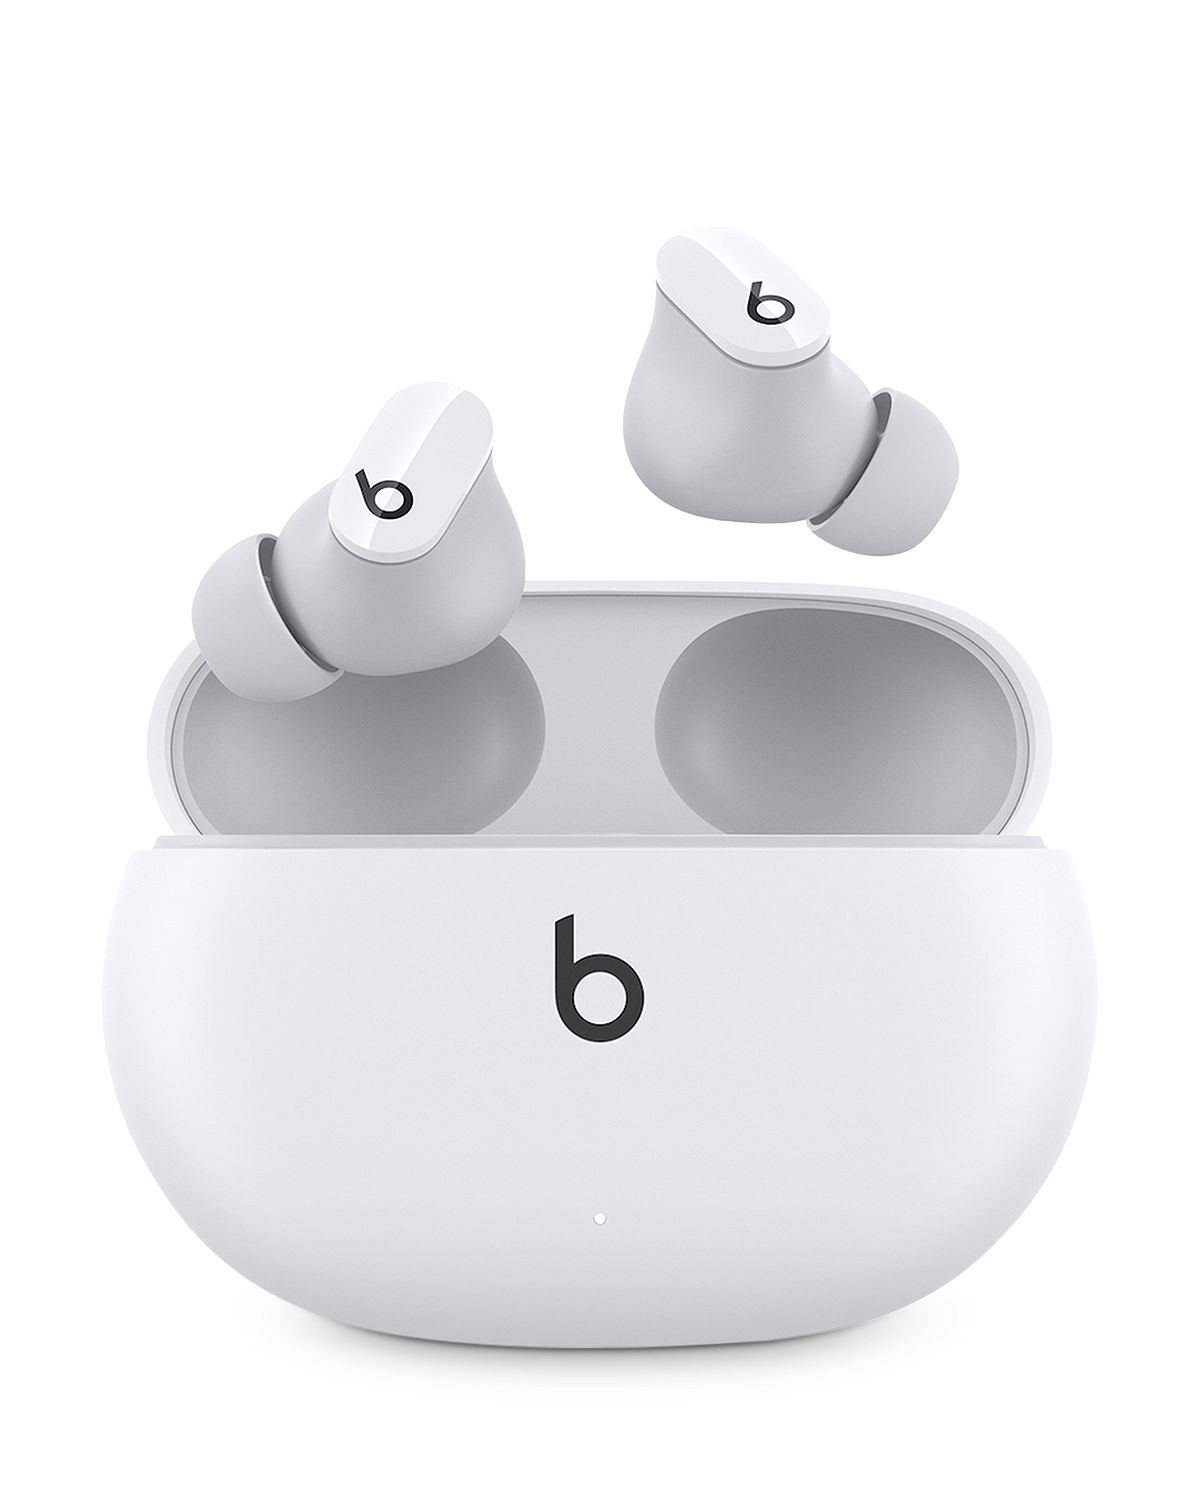 Photo 1 of Beats Studio Buds - True Wireless Noise Cancelling Earbuds - Compatible with Apple & Android, Built-in Microphone, IPX4 Rating, Sweat Resistant Earphones, Class 1 Bluetooth Headphones - White
factory sealed 